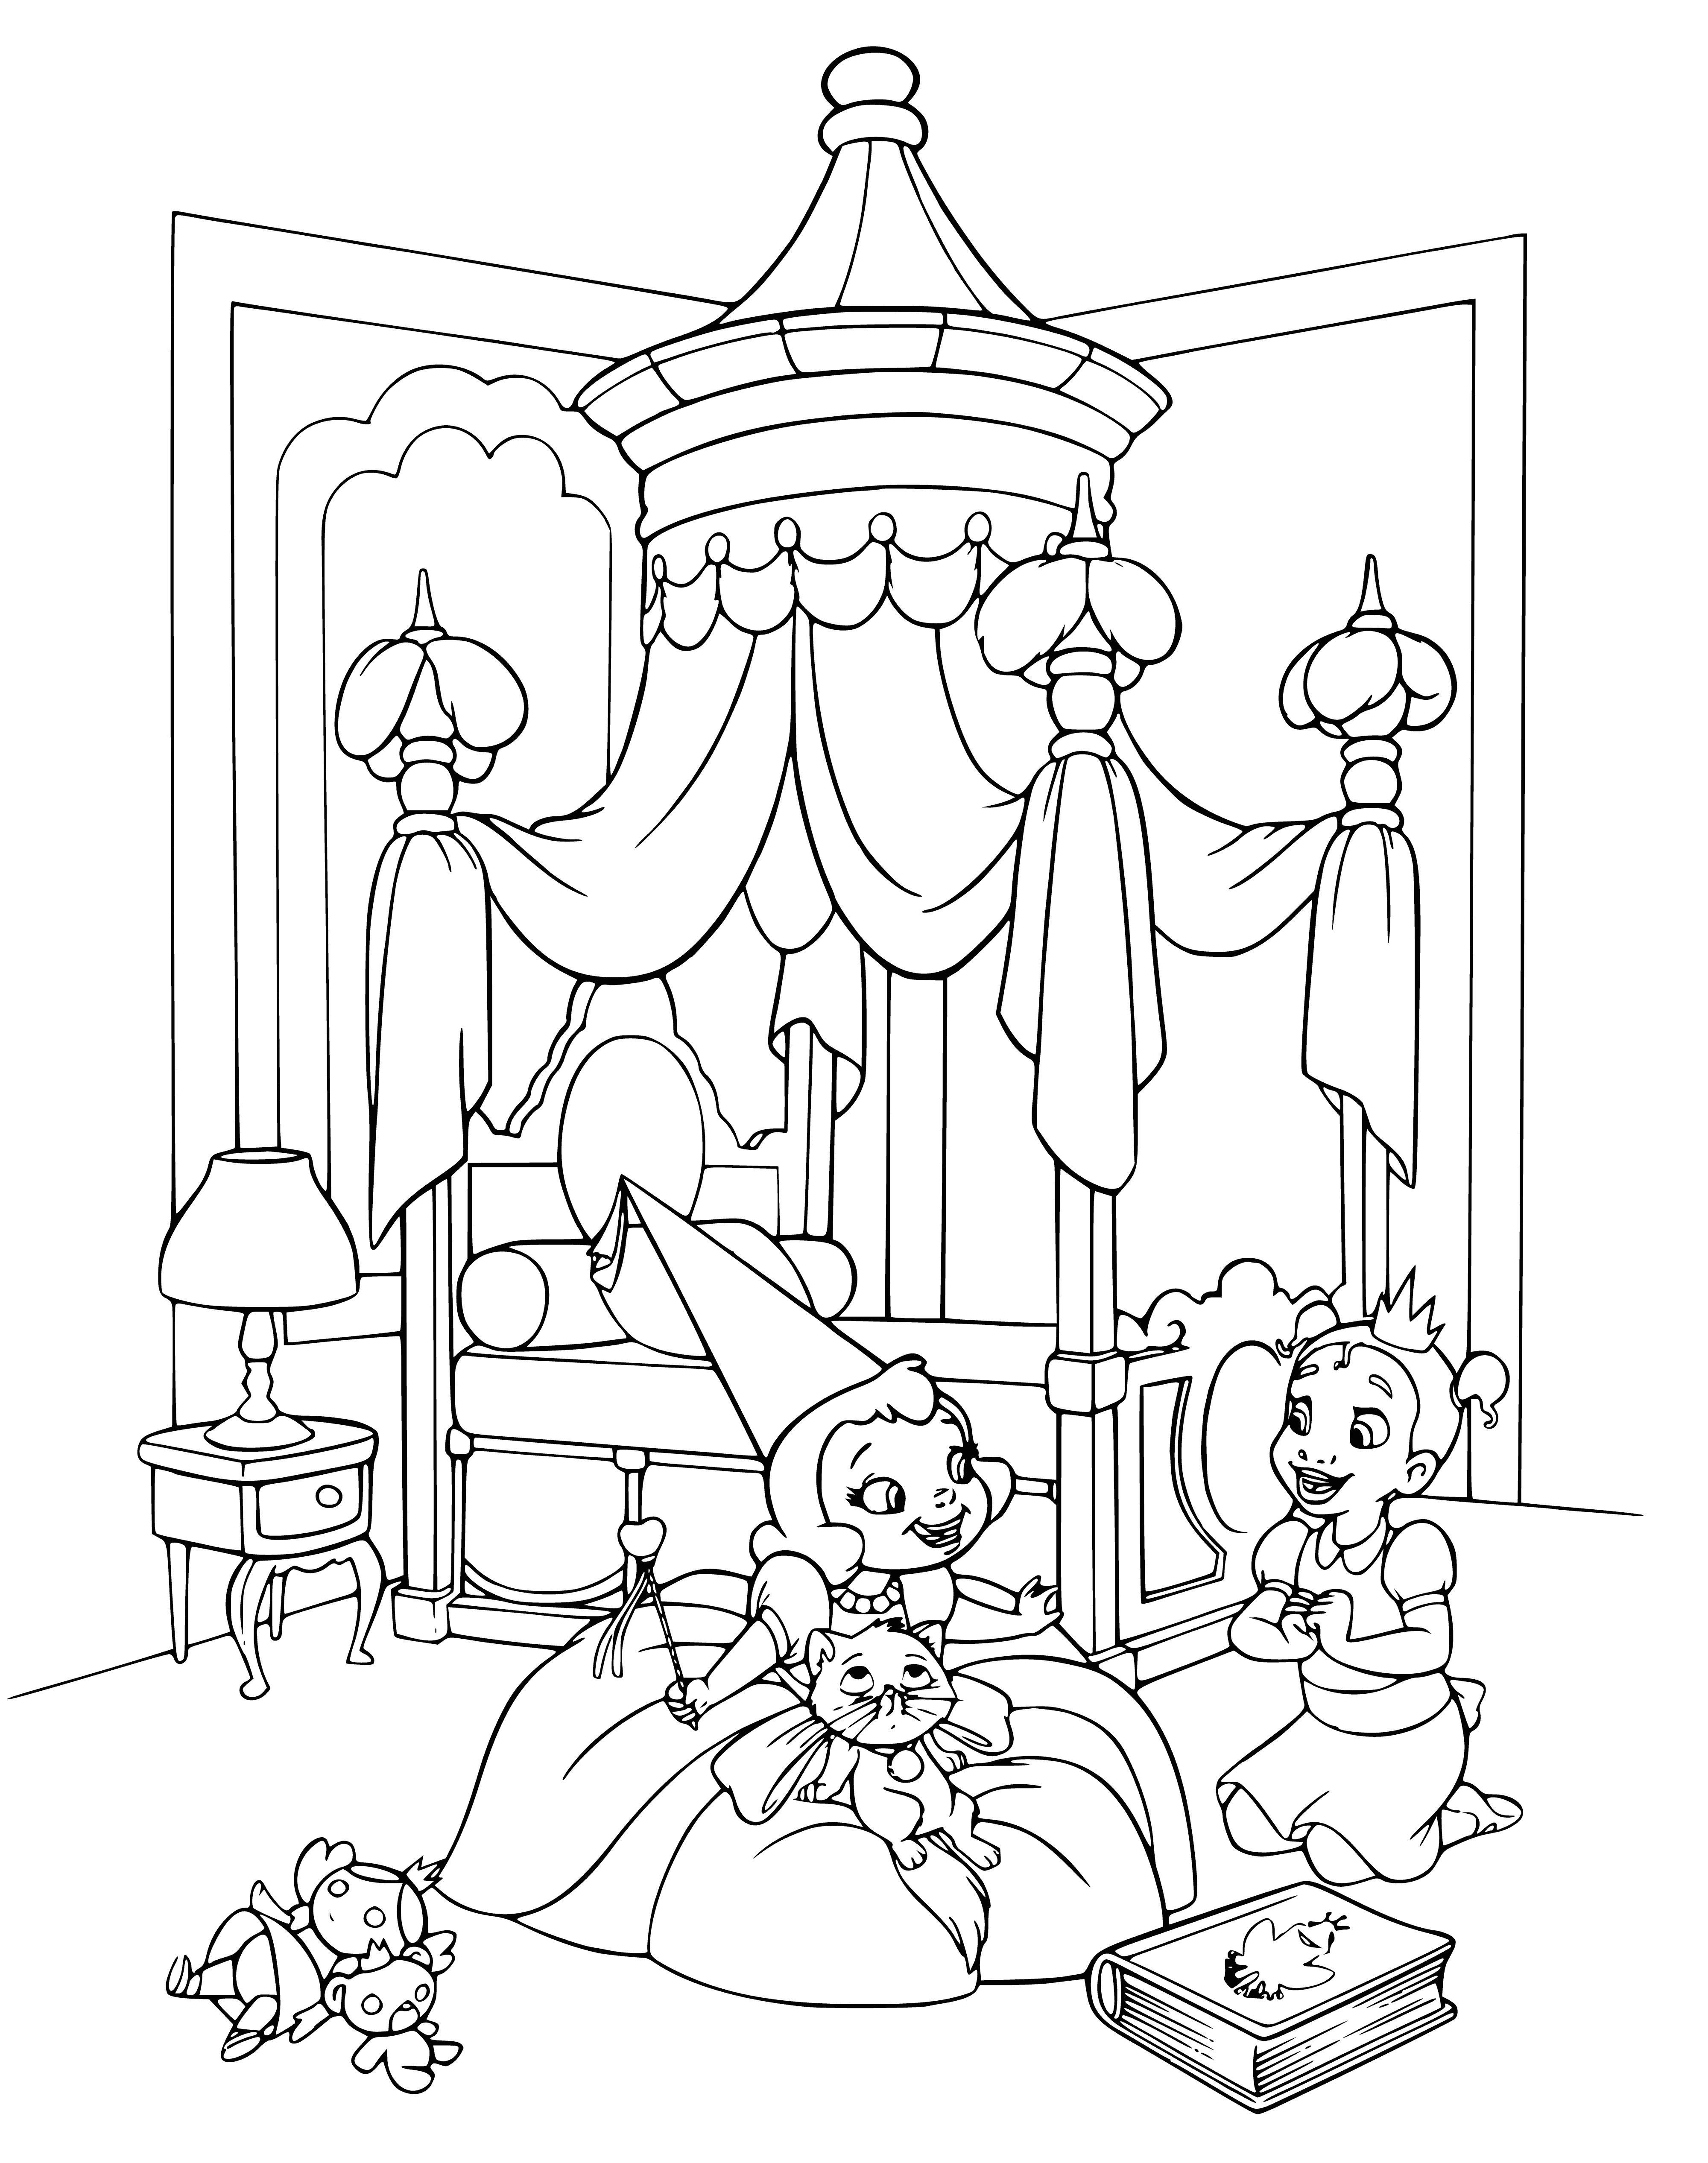 Charlotte's room coloring page